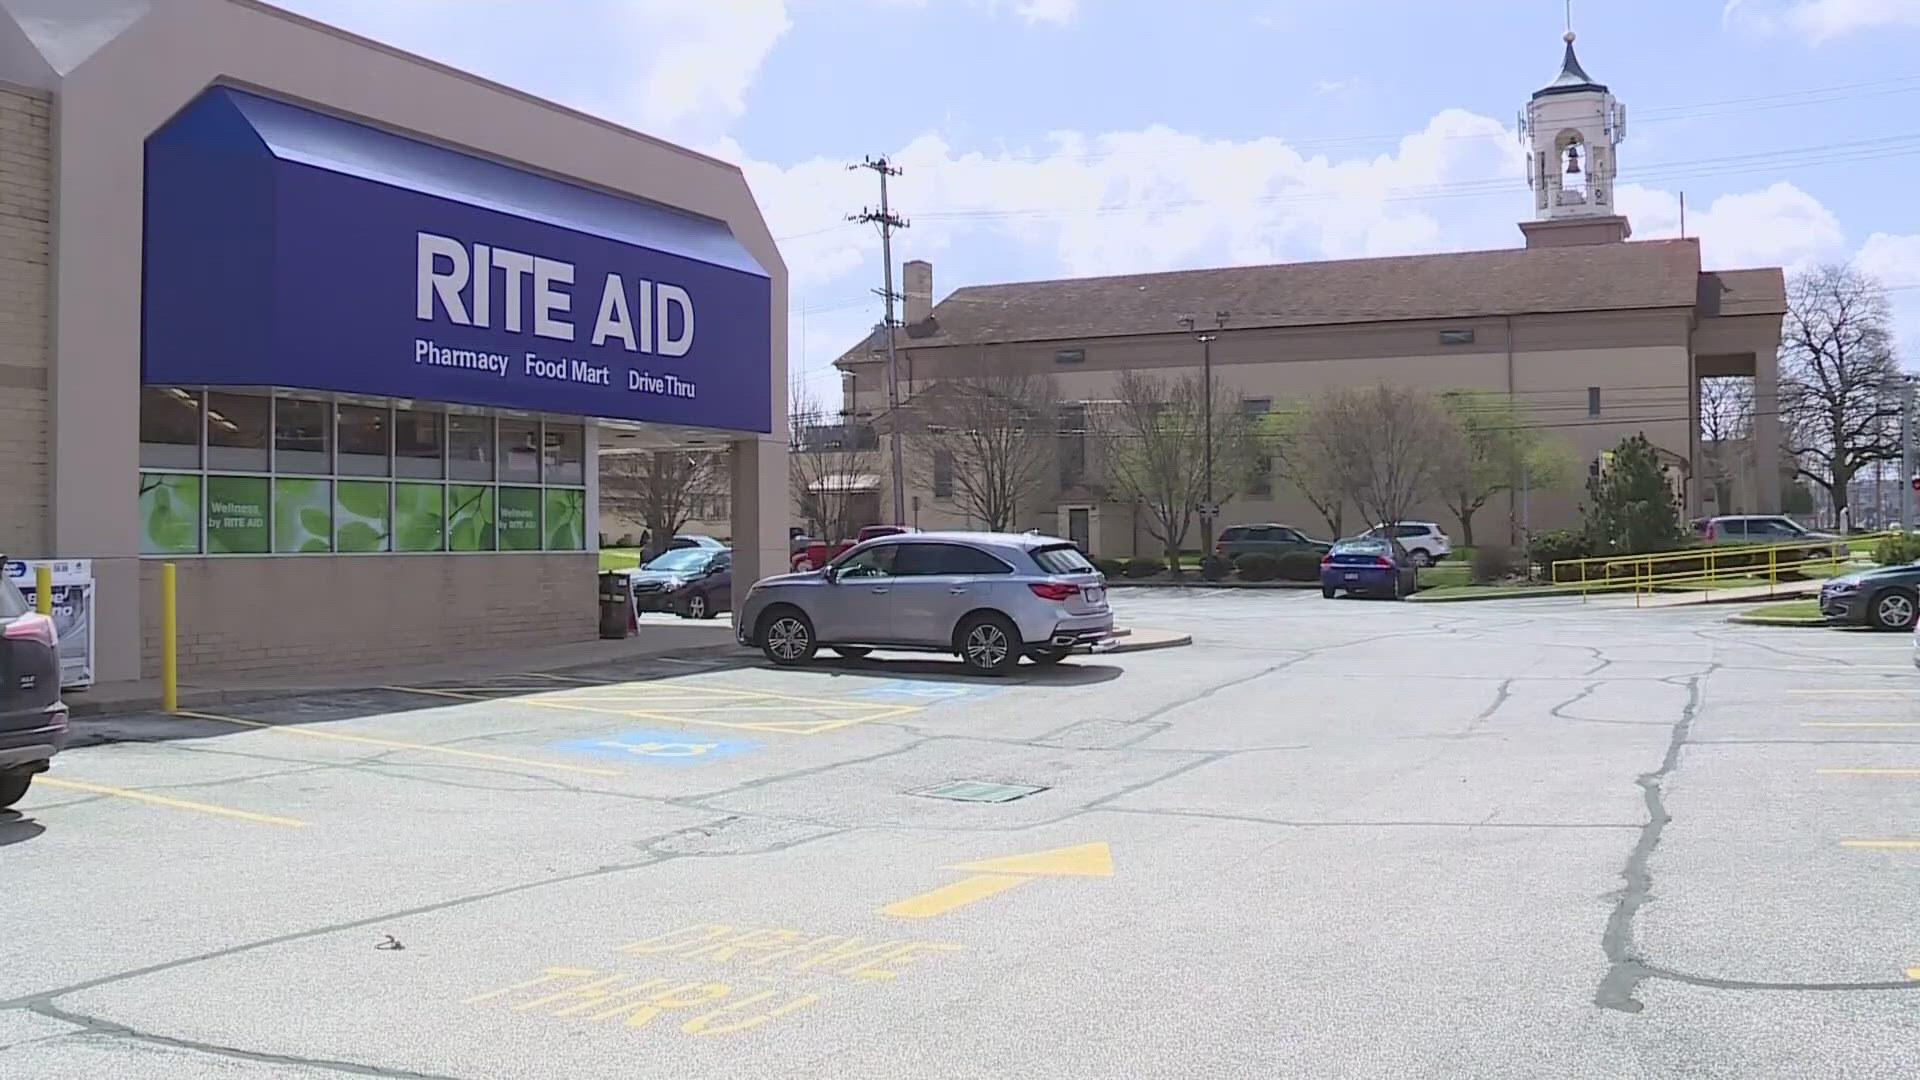 The latest list of Rite Aid stores closing includes locations in Westlake, Shaker Heights, Painesville, Tallmadge, and Canton.